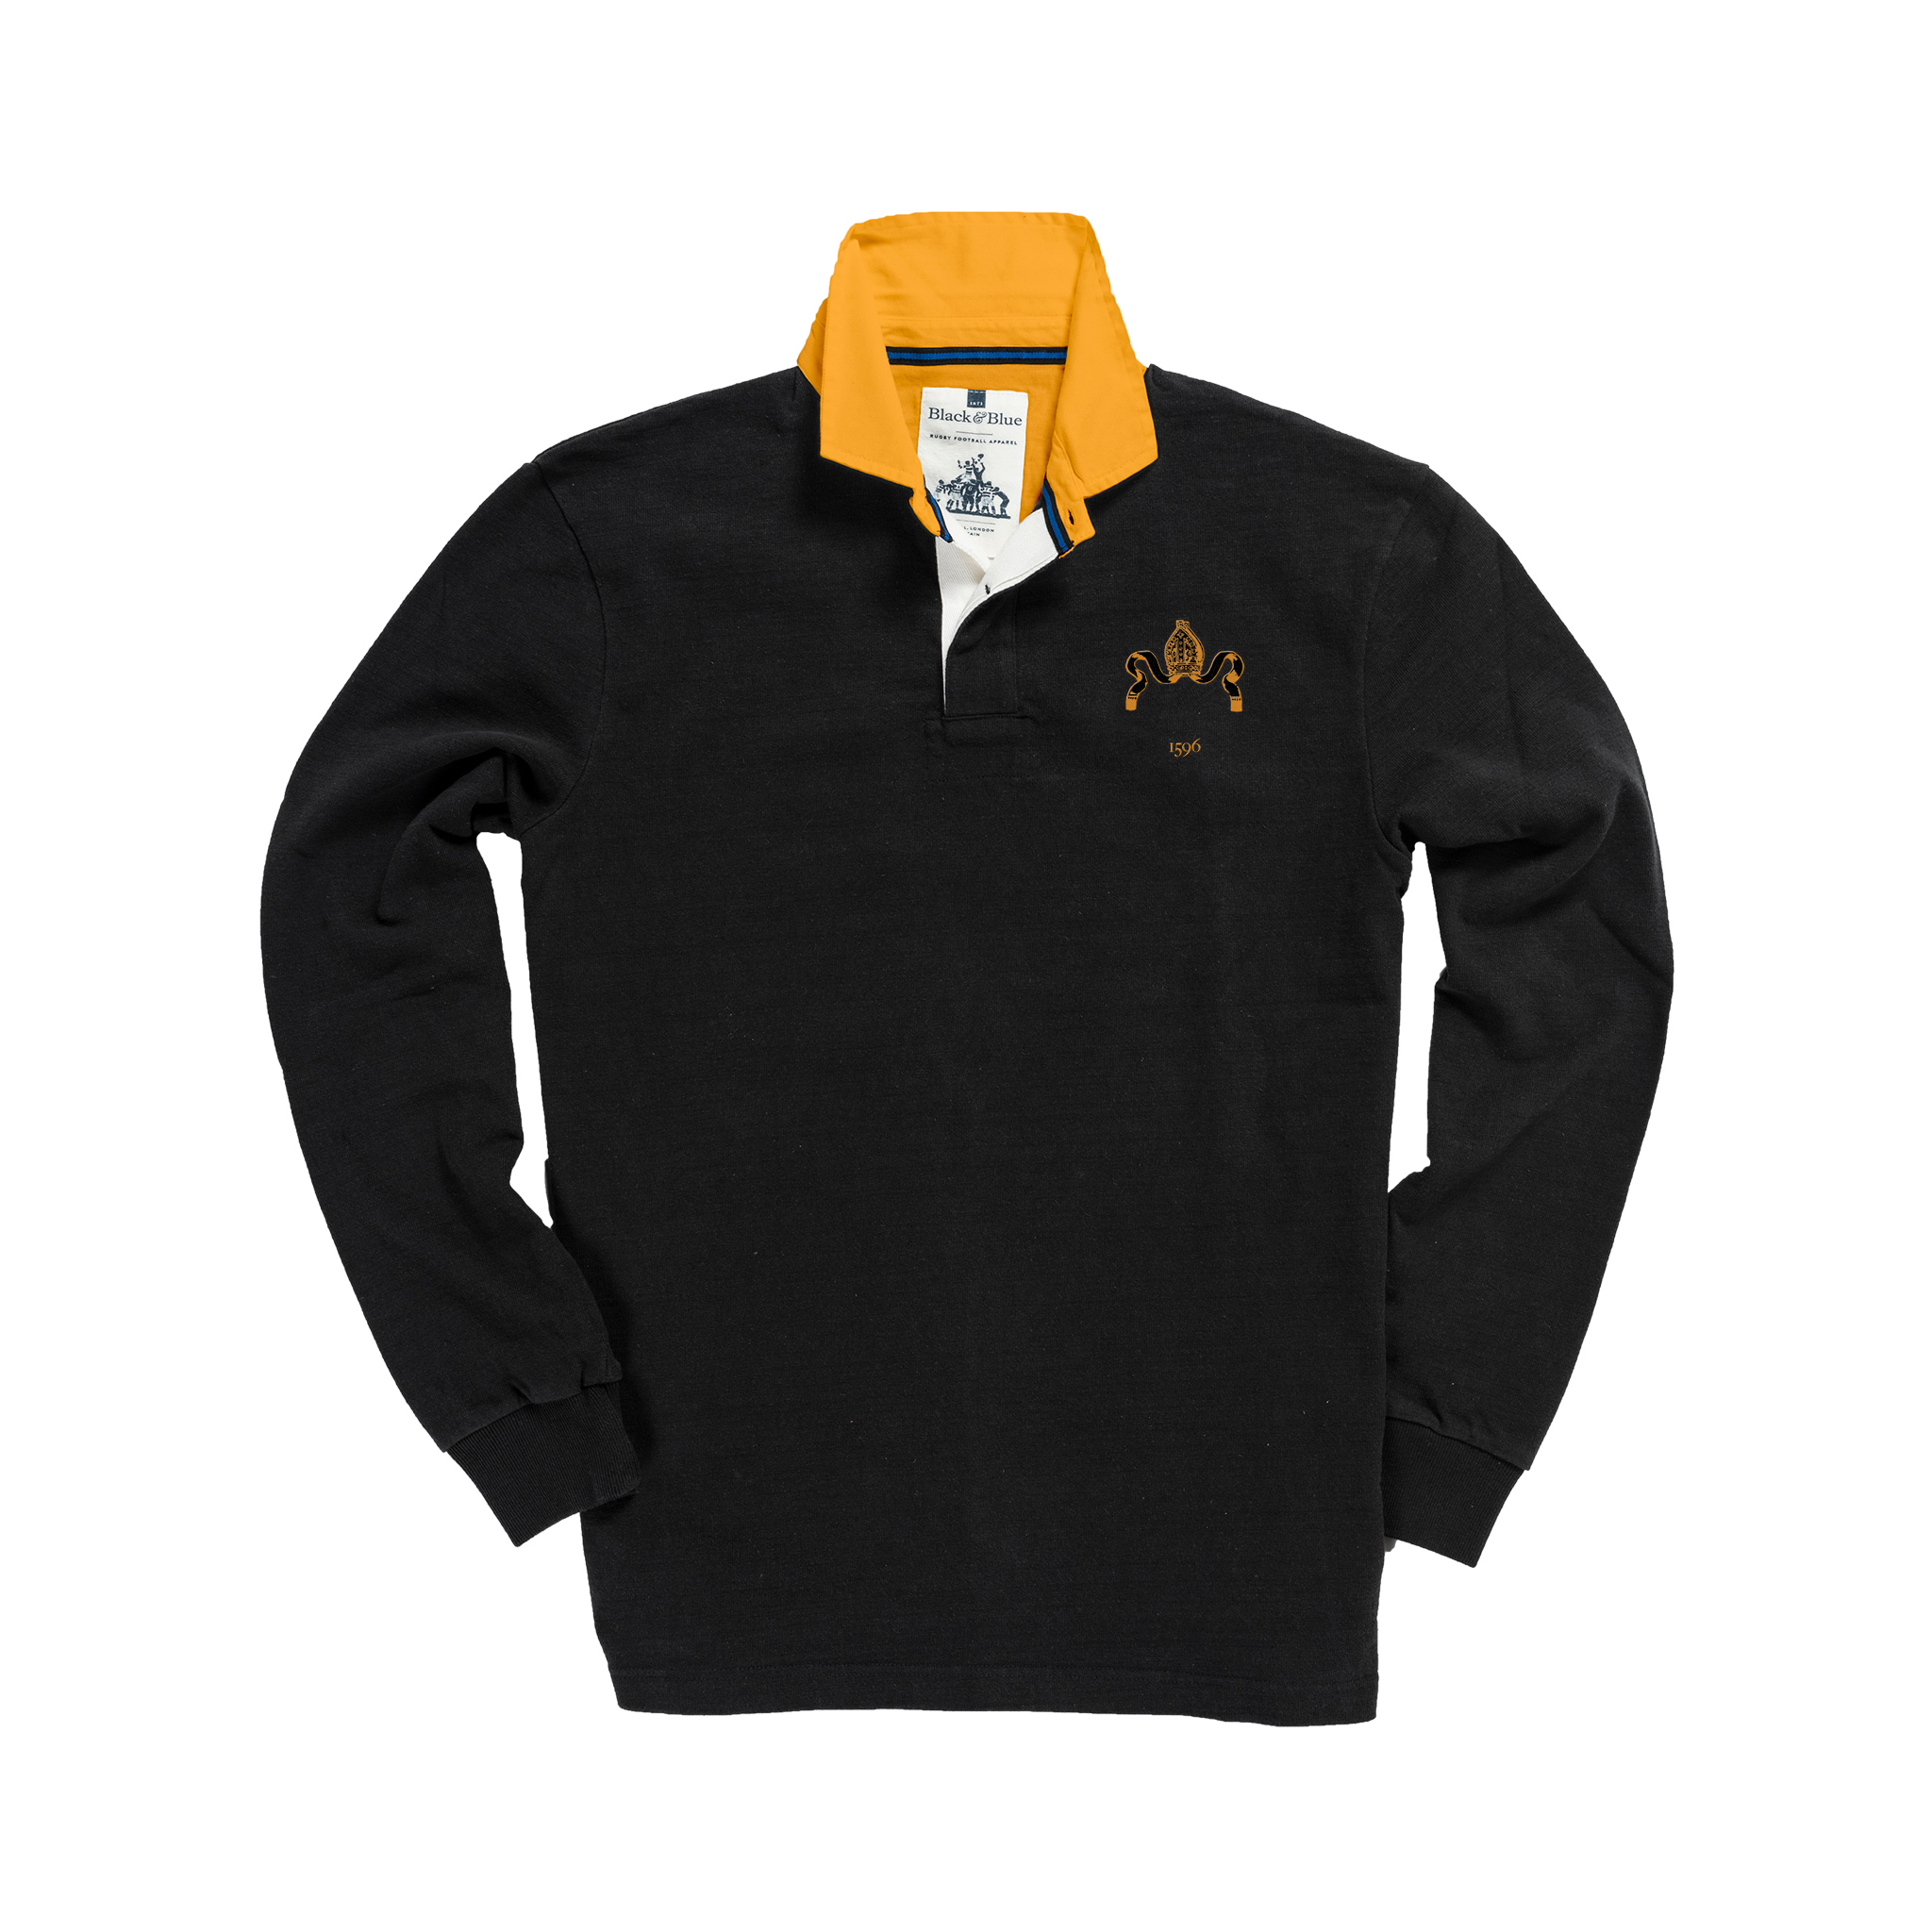 Whitgift 1596 Rugby Shirt_Front